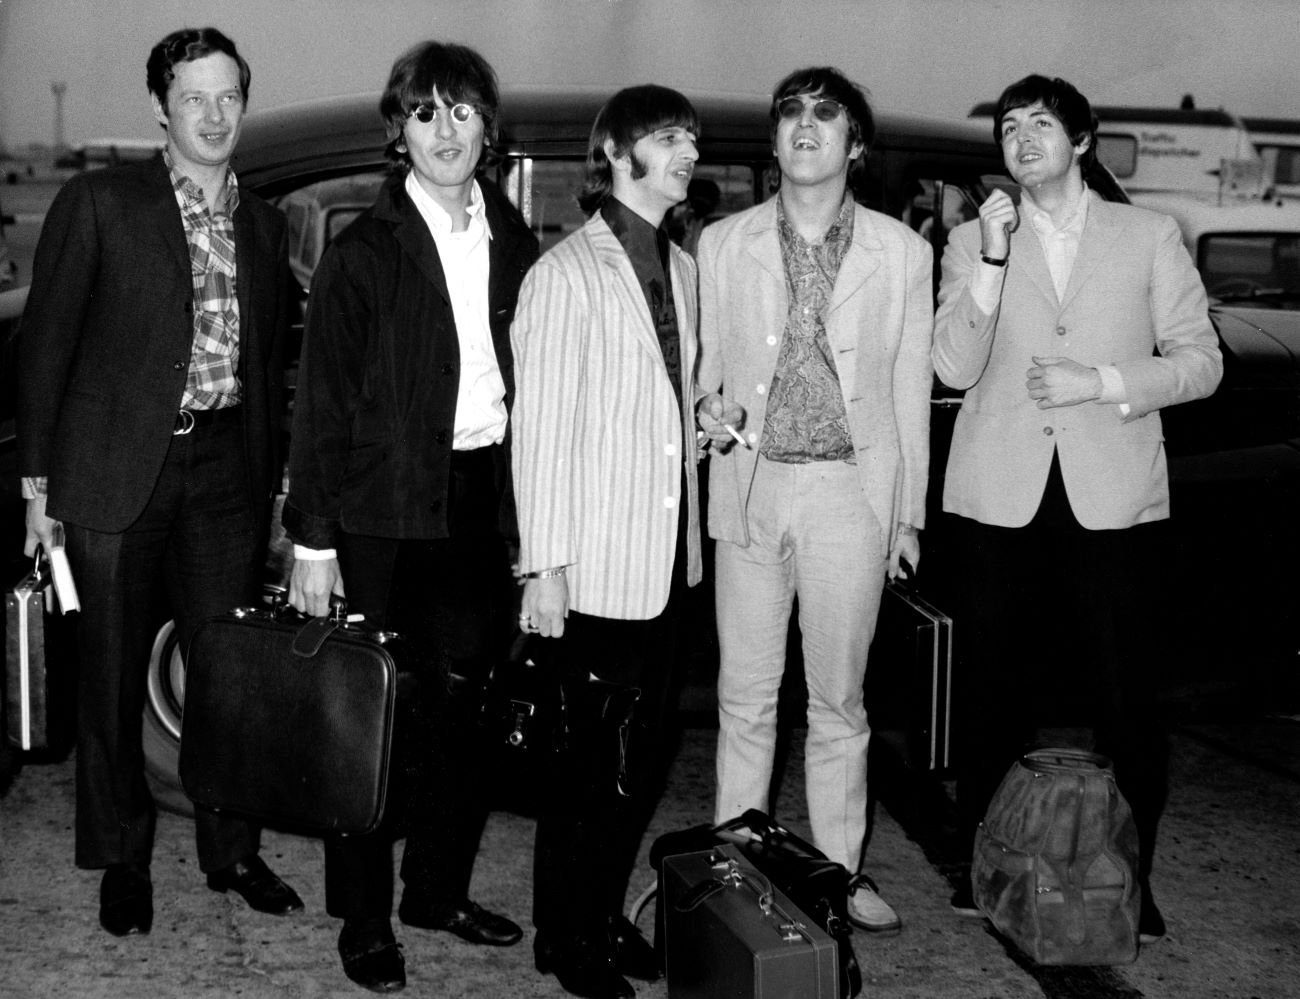 A black and white picture of The Beatles' manager Brian Epstein and the band holding suitcases.